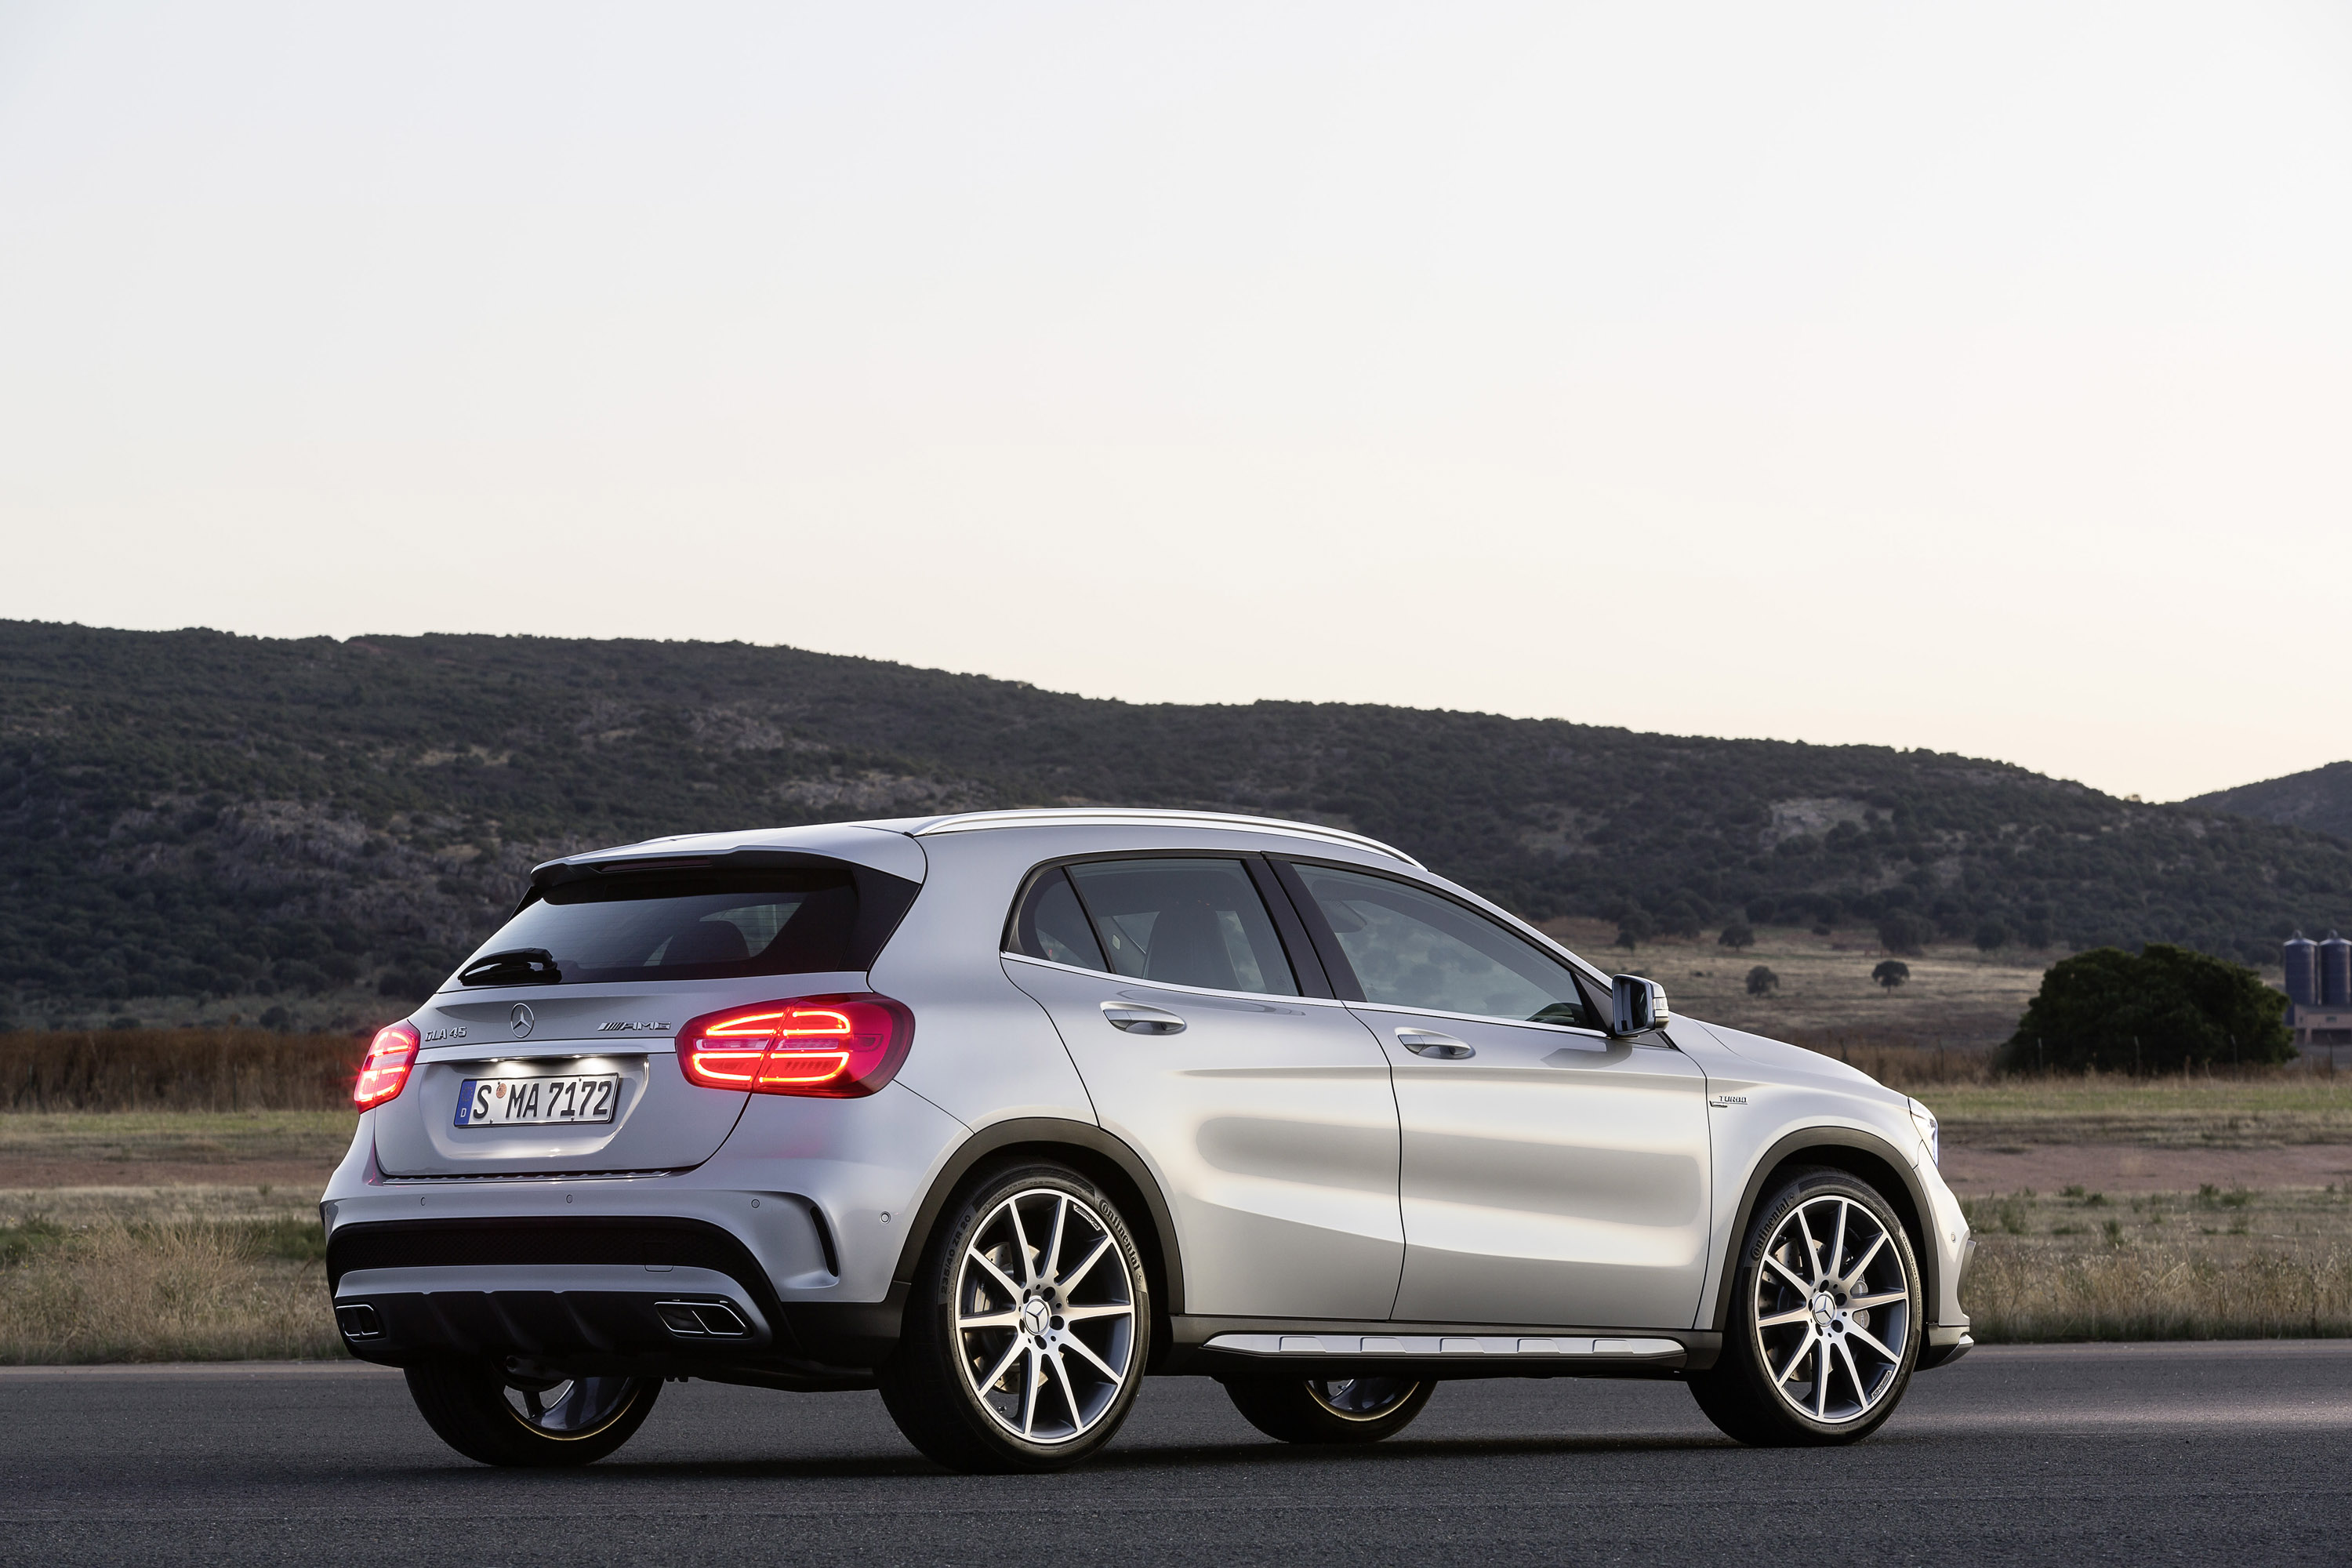 Mercedes GLA-Class (H247) modern specifications